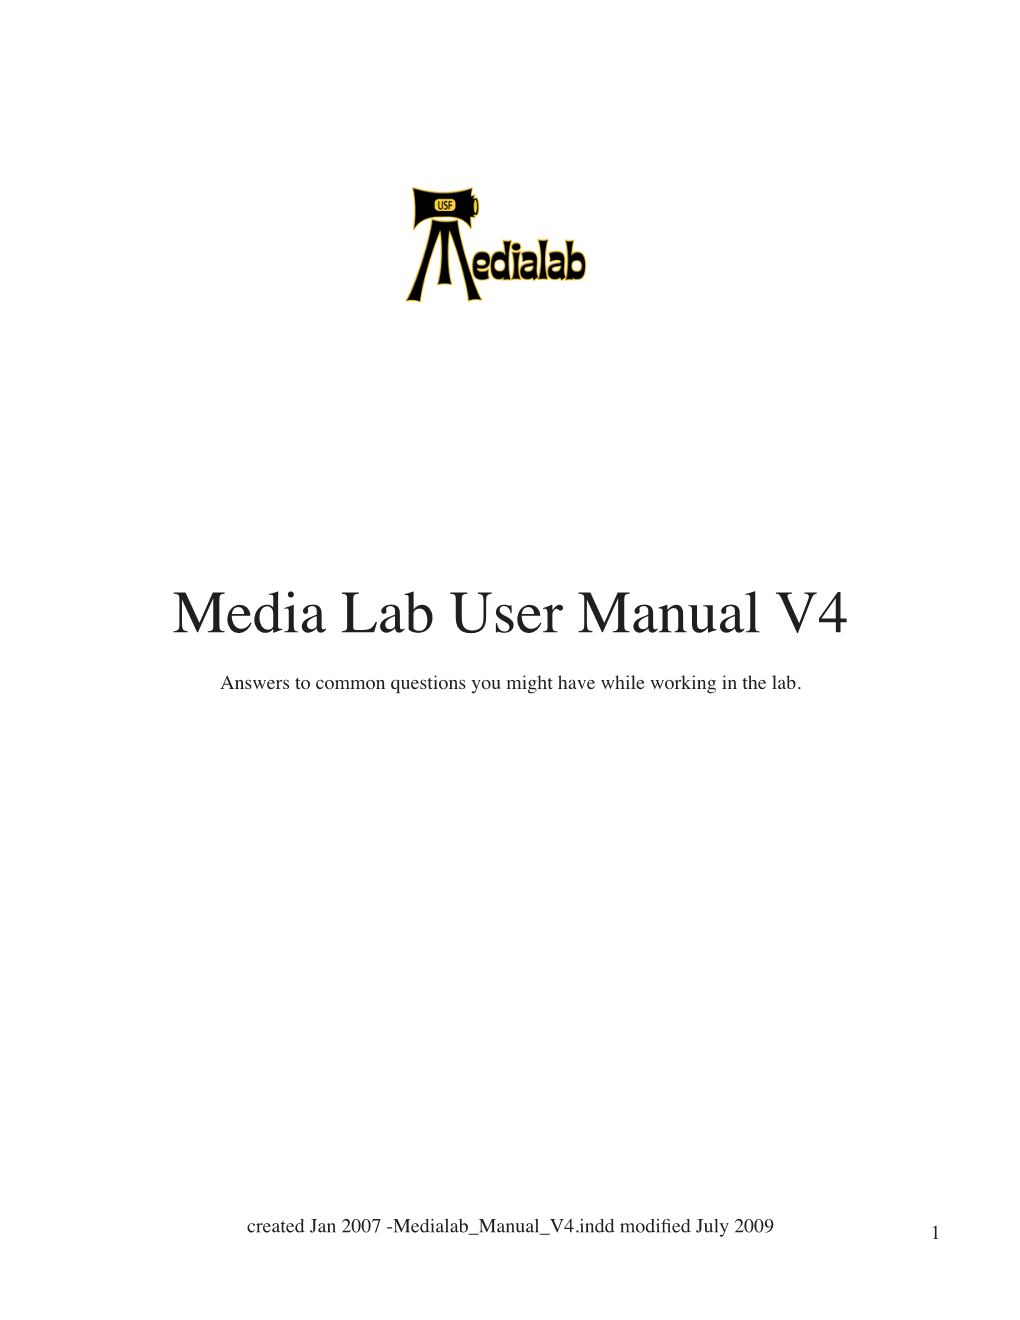 Media Lab User Manual V4 Answers to Common Questions You Might Have While Working in the Lab